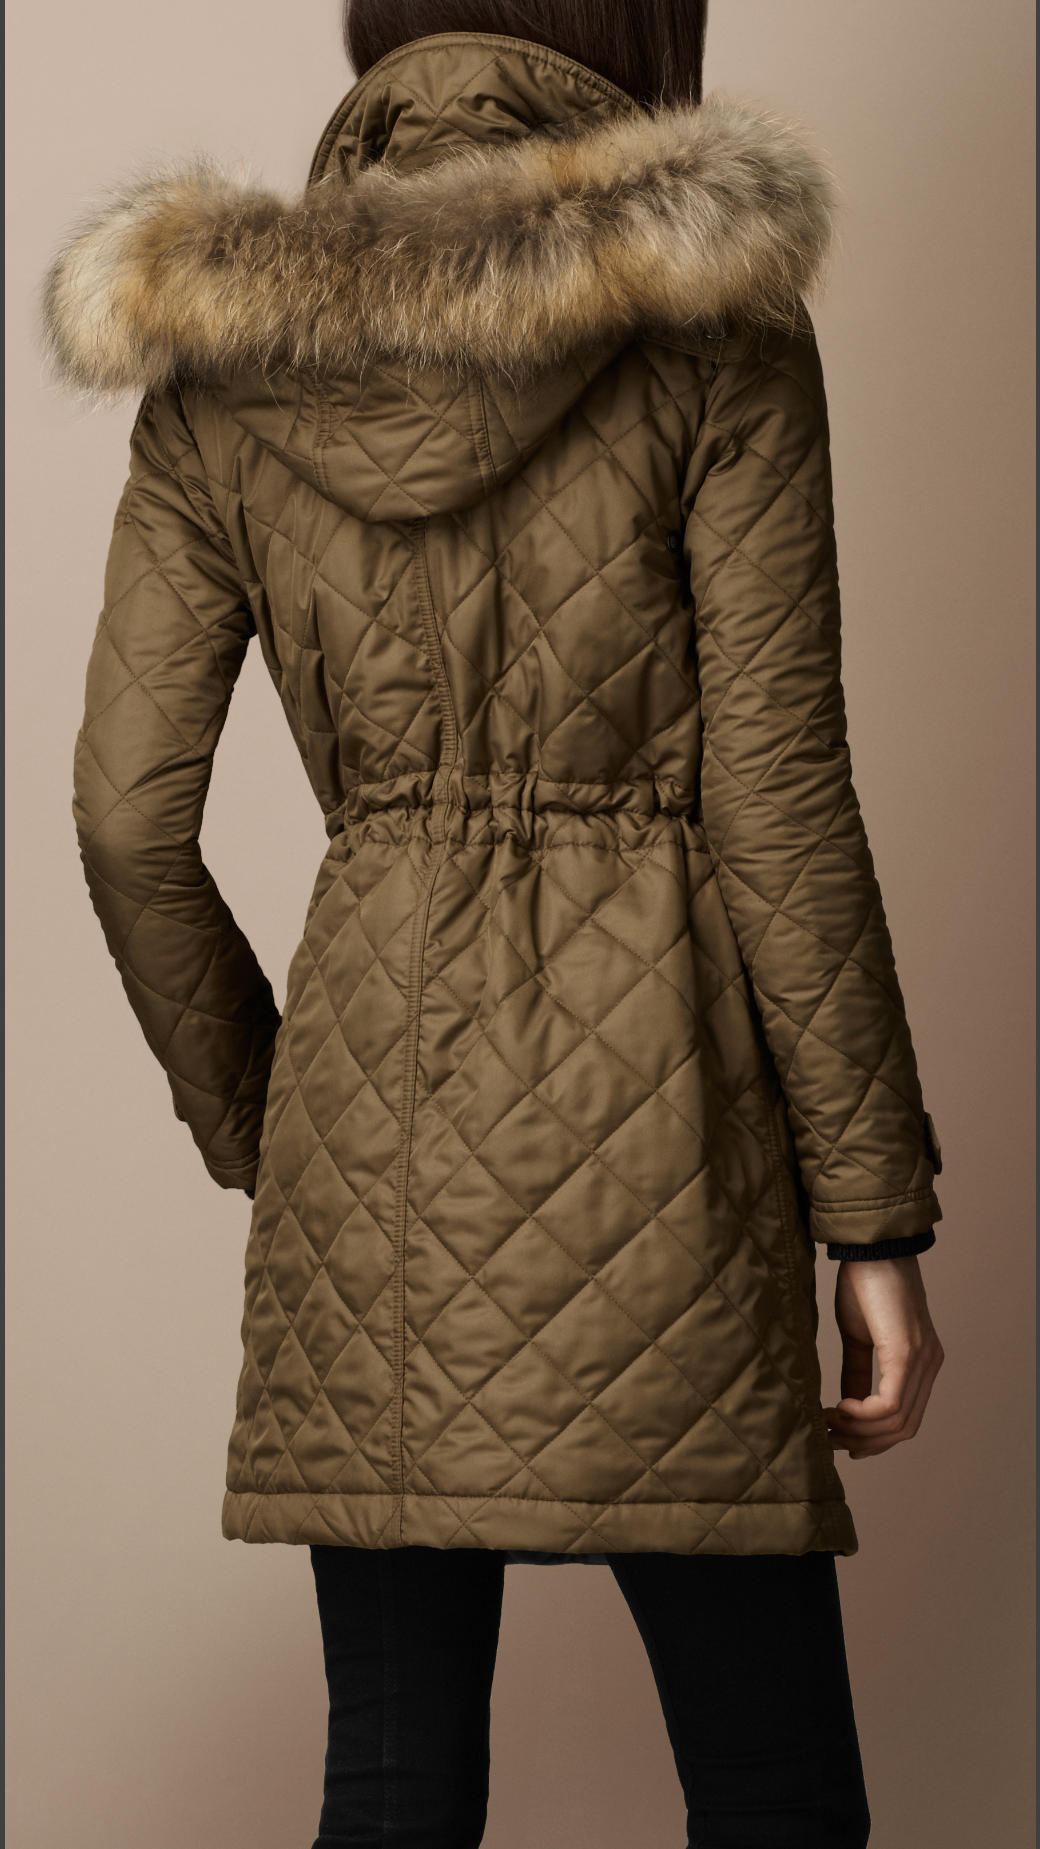 Lyst - Burberry Brit Diamond Quilted Fur Trim Parka in Green